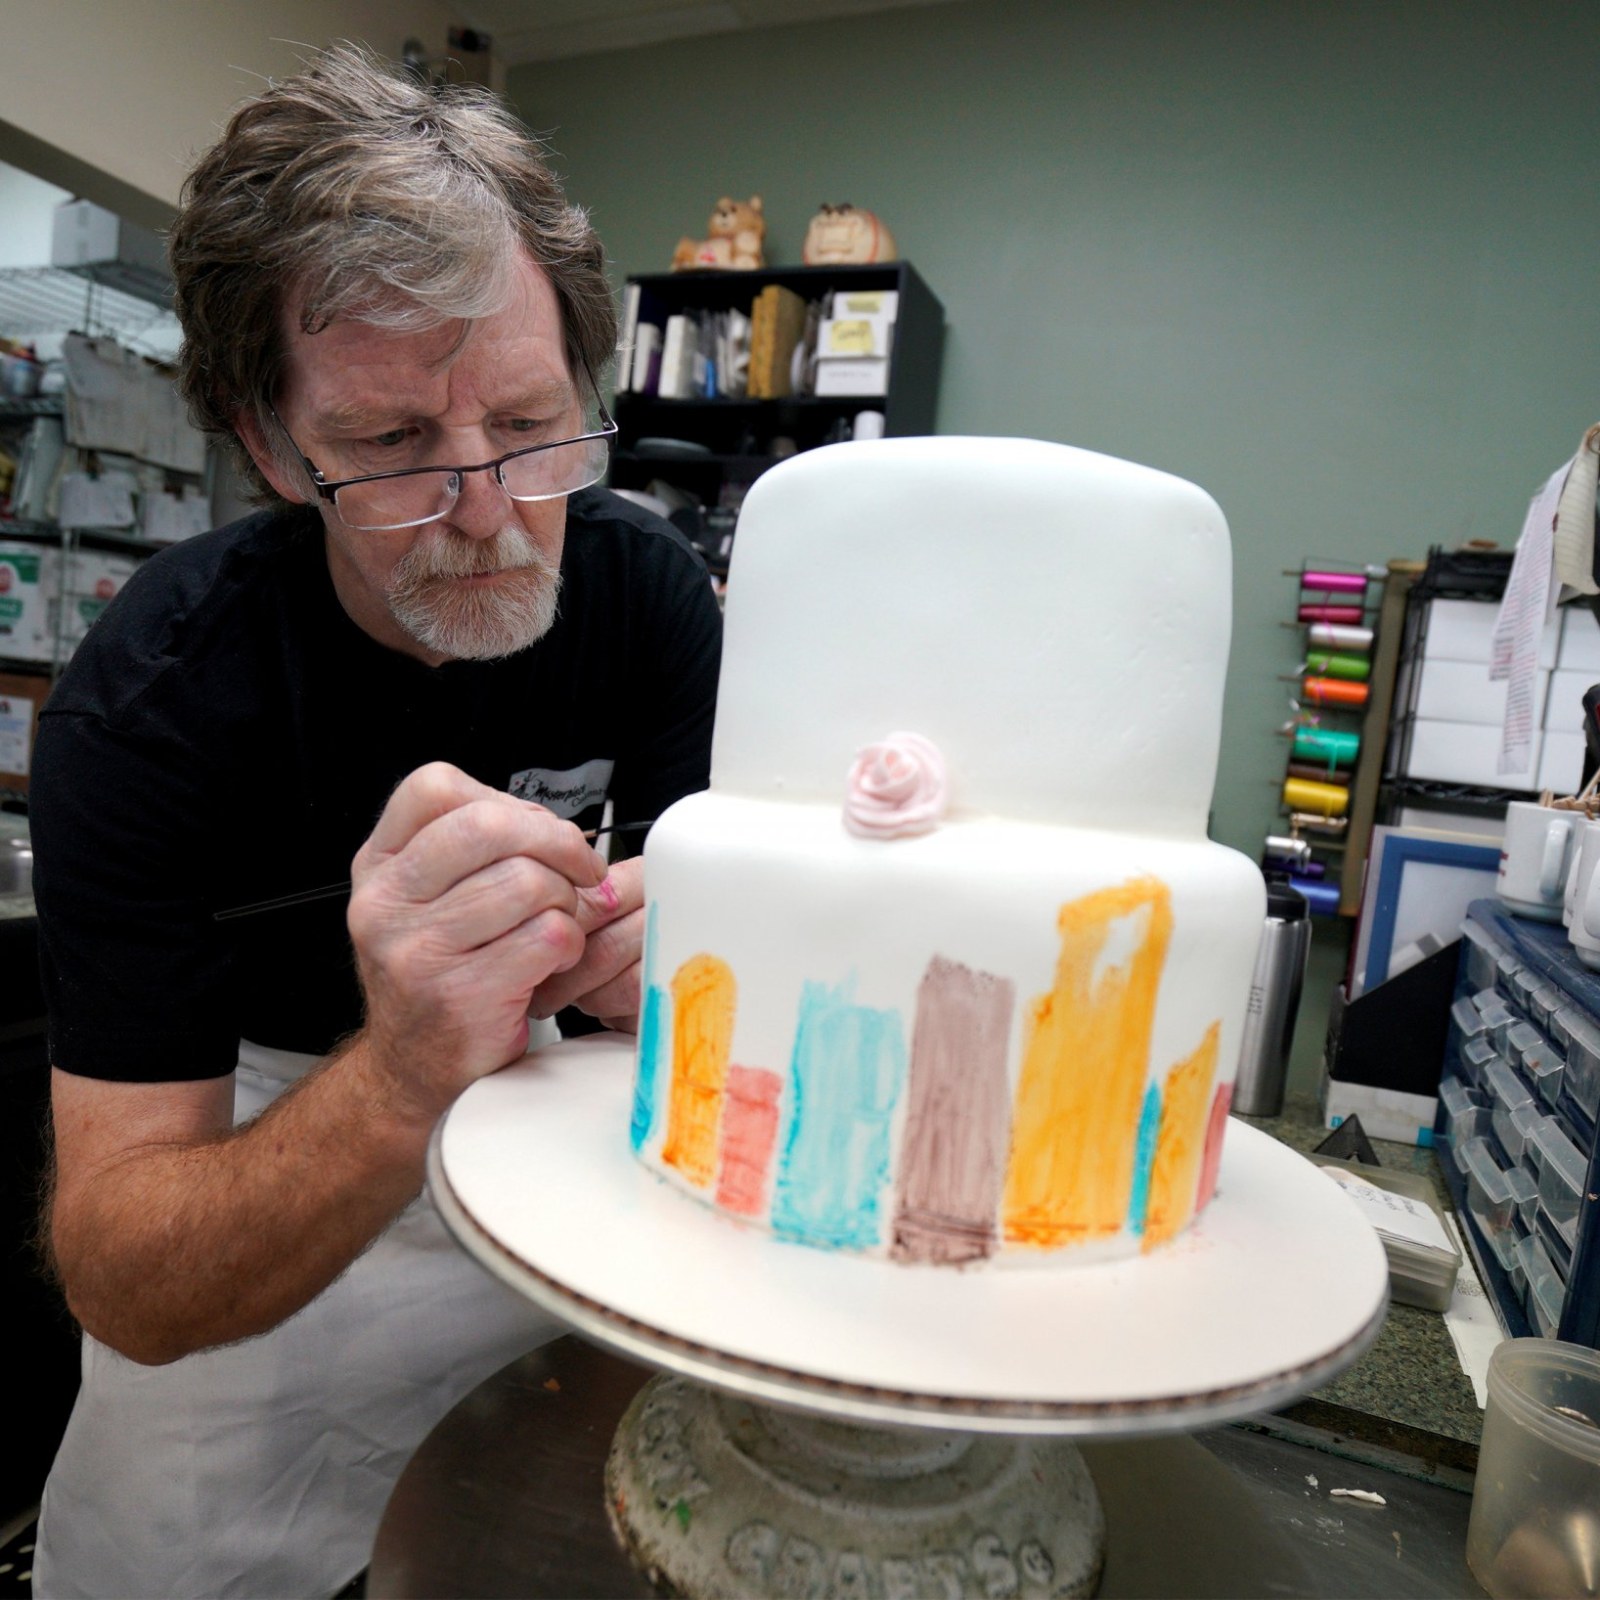 Colorado Baker S Protagonist Allegedly Requested Satanic Cakes That Other Bakeries Wouldn T Create Hassle free premium theme created for lawyers, attorneys and legal related services. satanic cakes that other bakeries